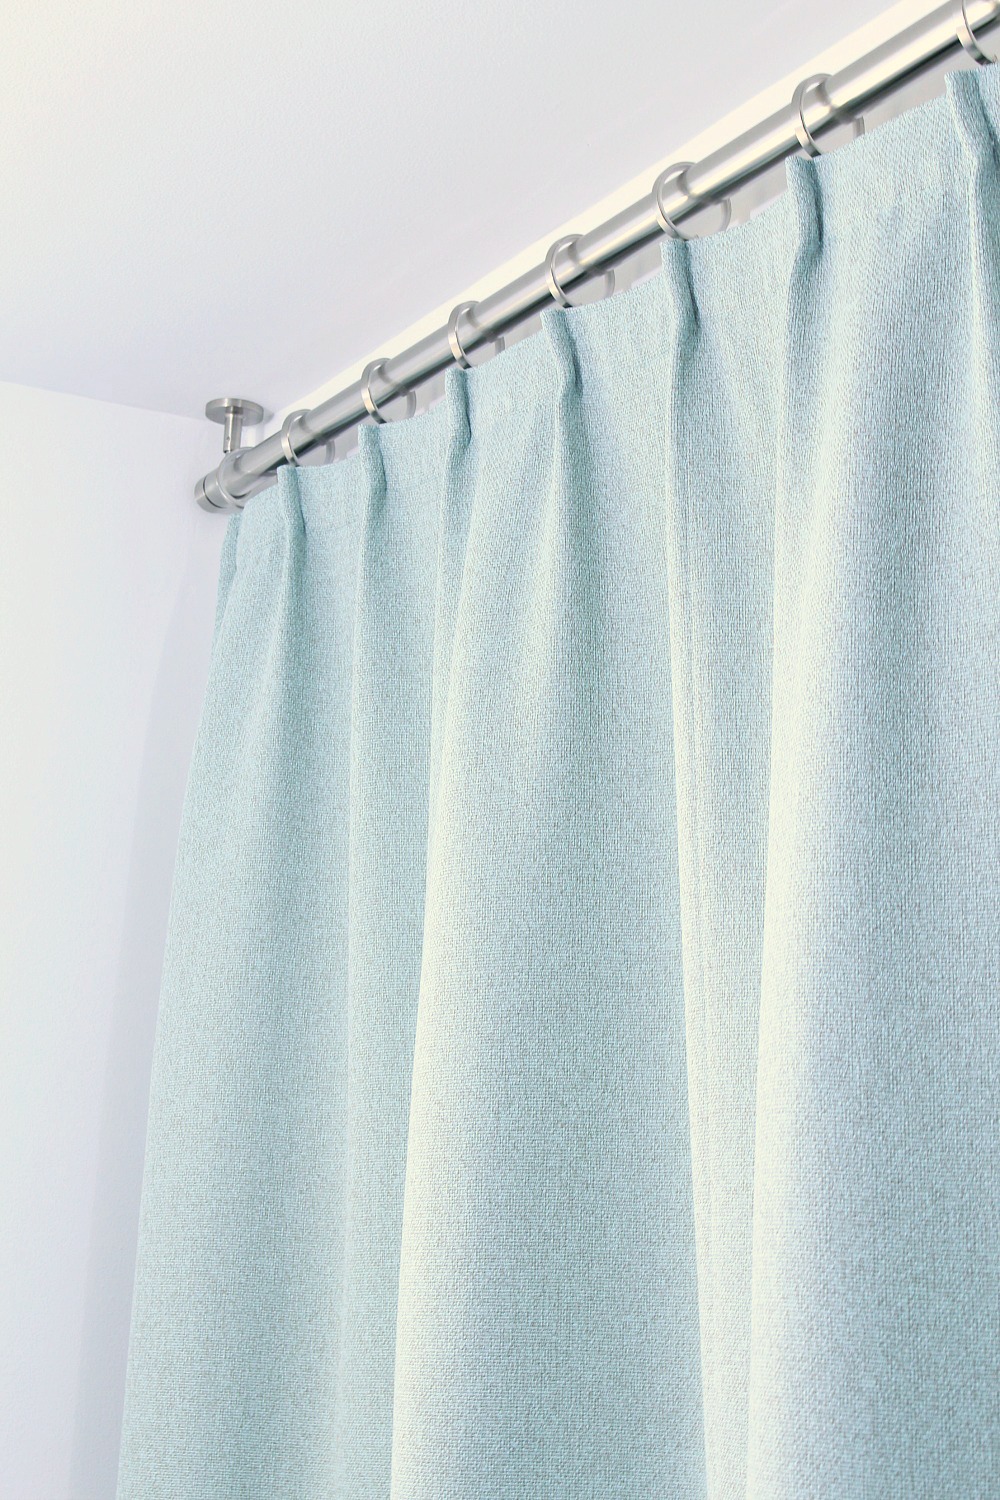 Bathroom Update: Ceiling Mounted Shower Curtain Rod + Turquoise Tweed